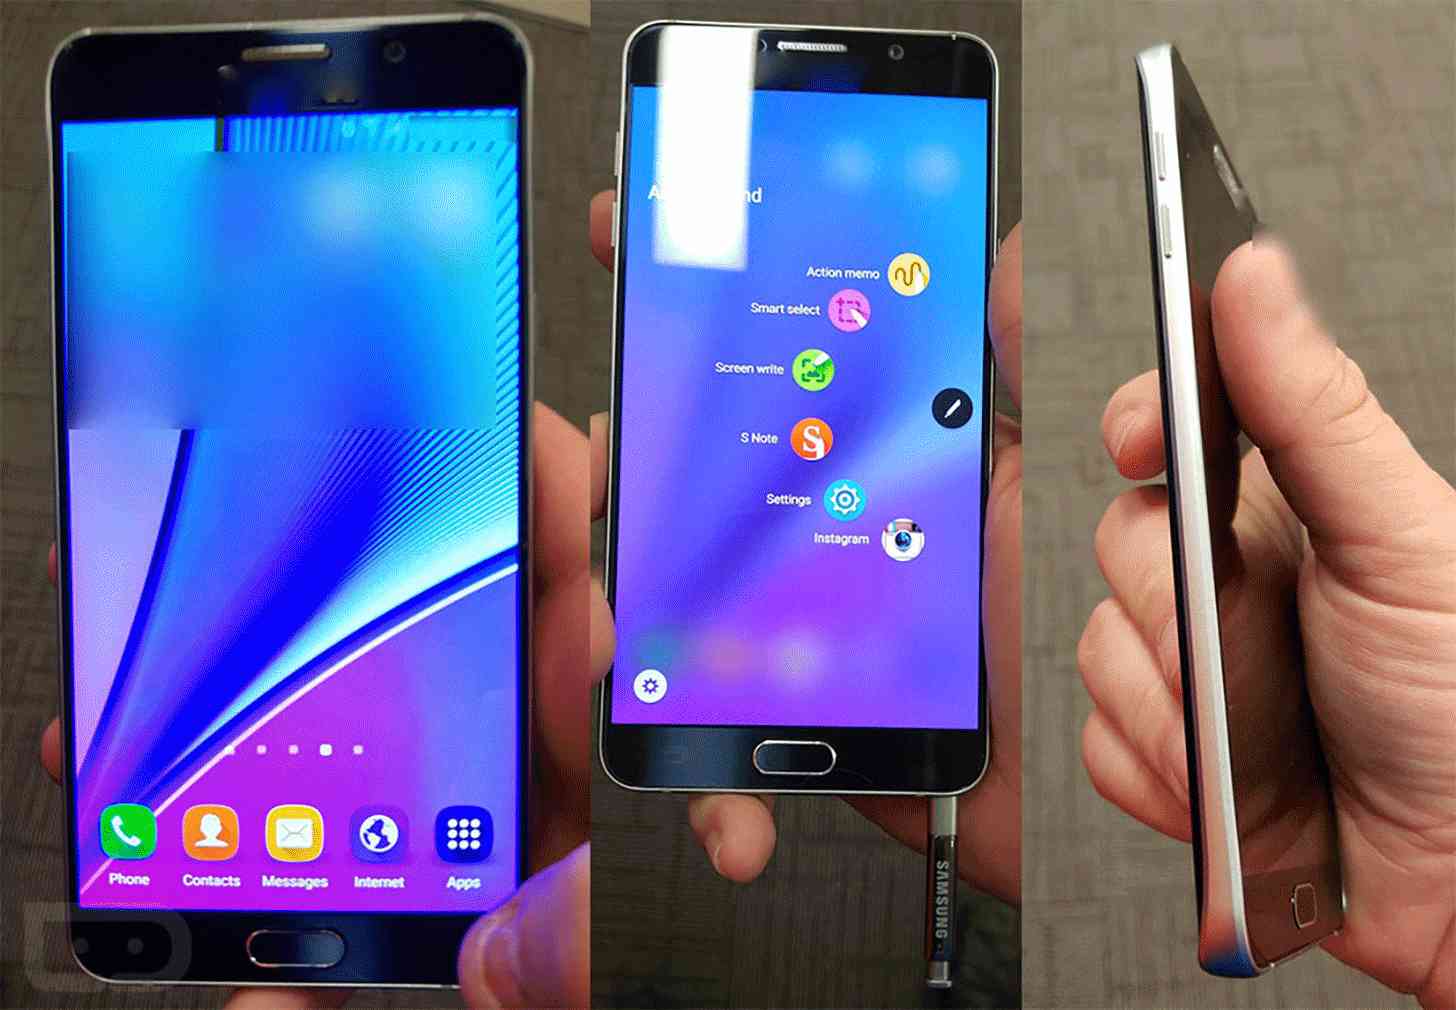 Samsung Galaxy Note 5 hands on leak large